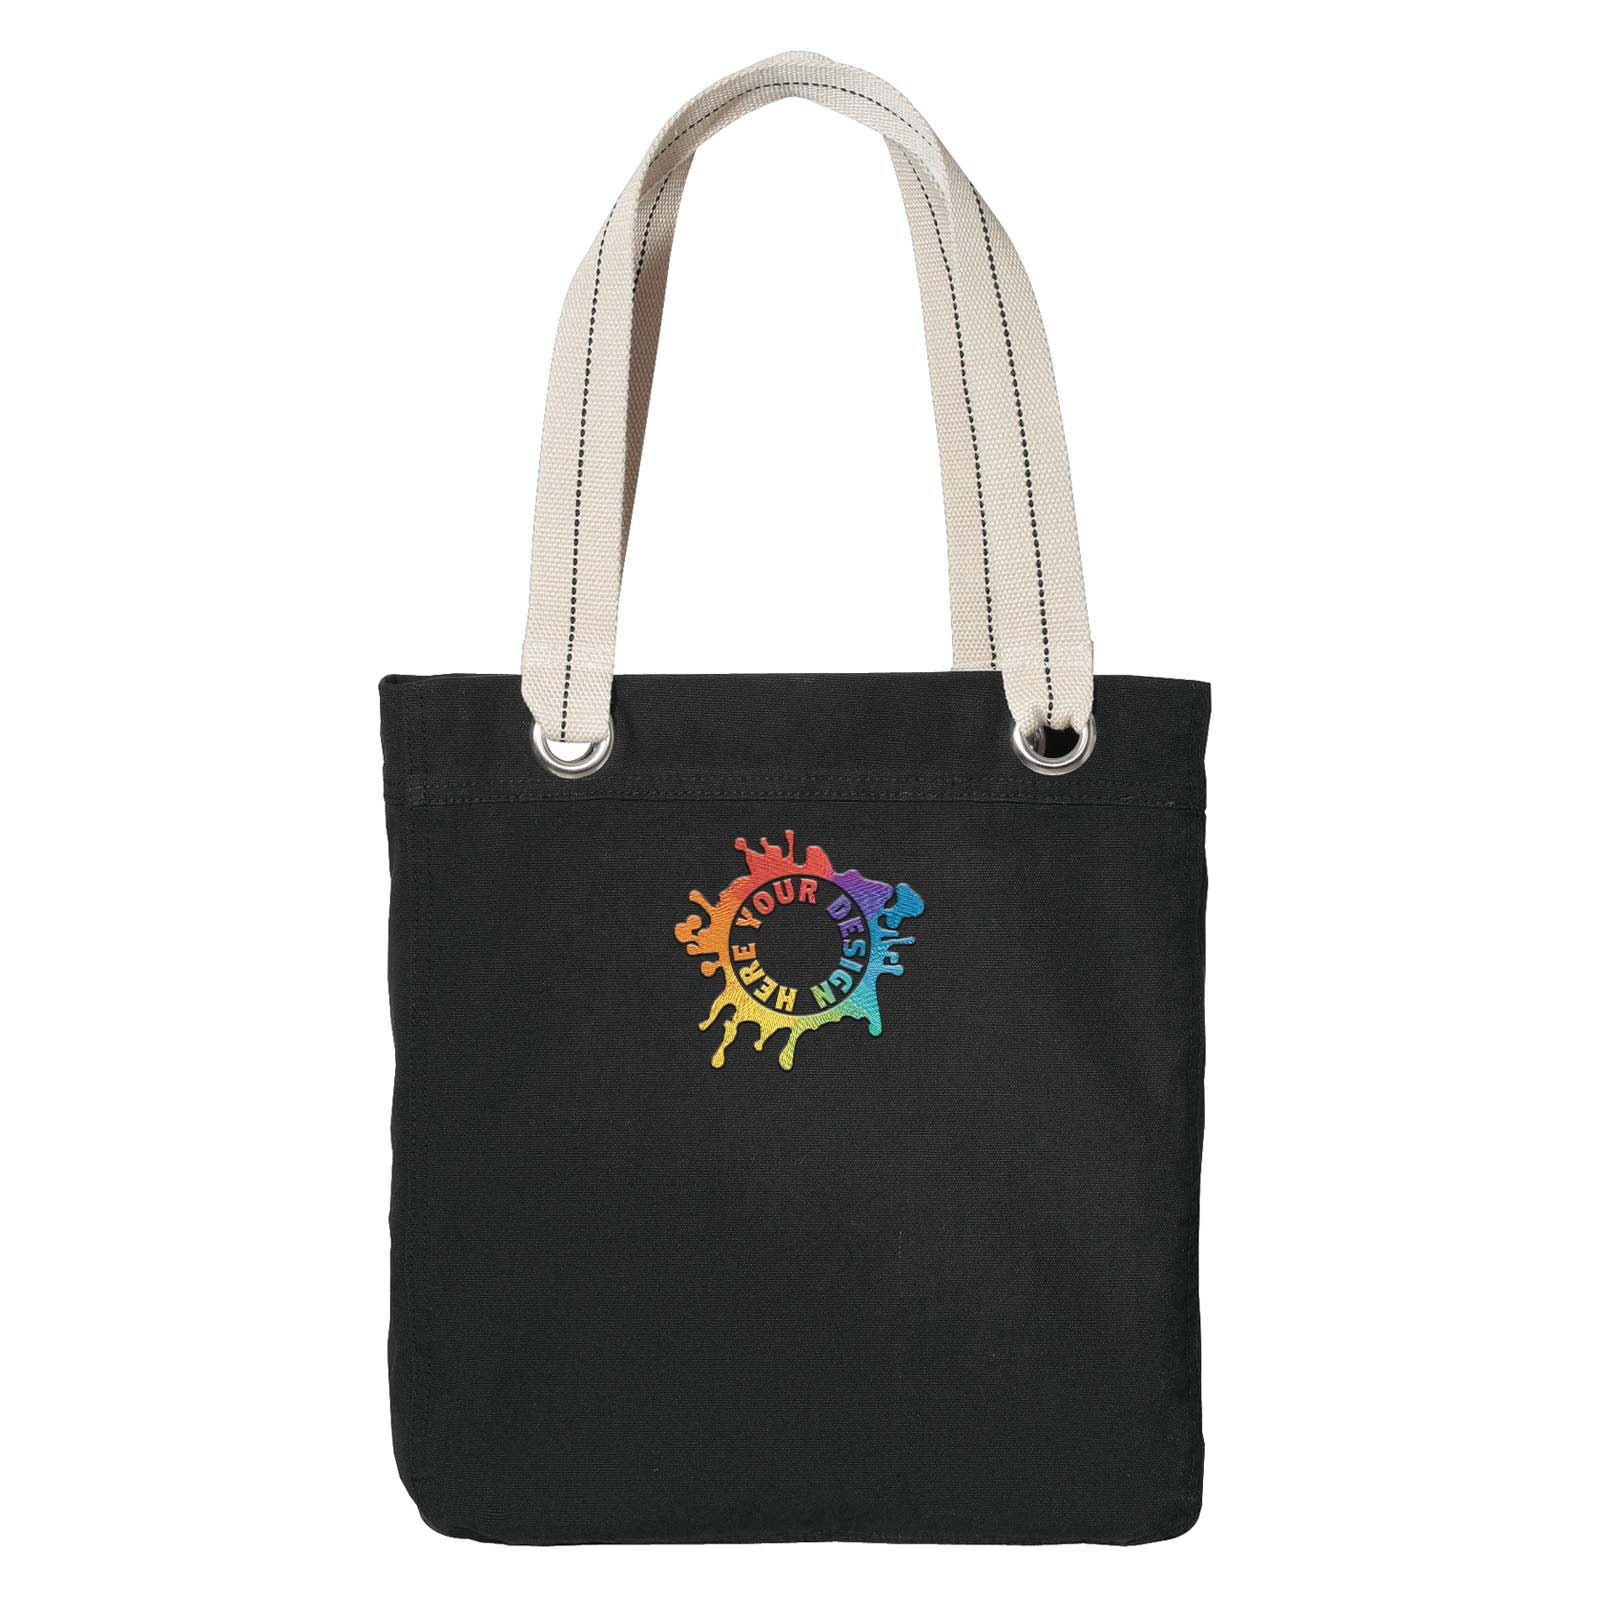 Port Authority® Allie Tote Embroidery - Mato & Hash